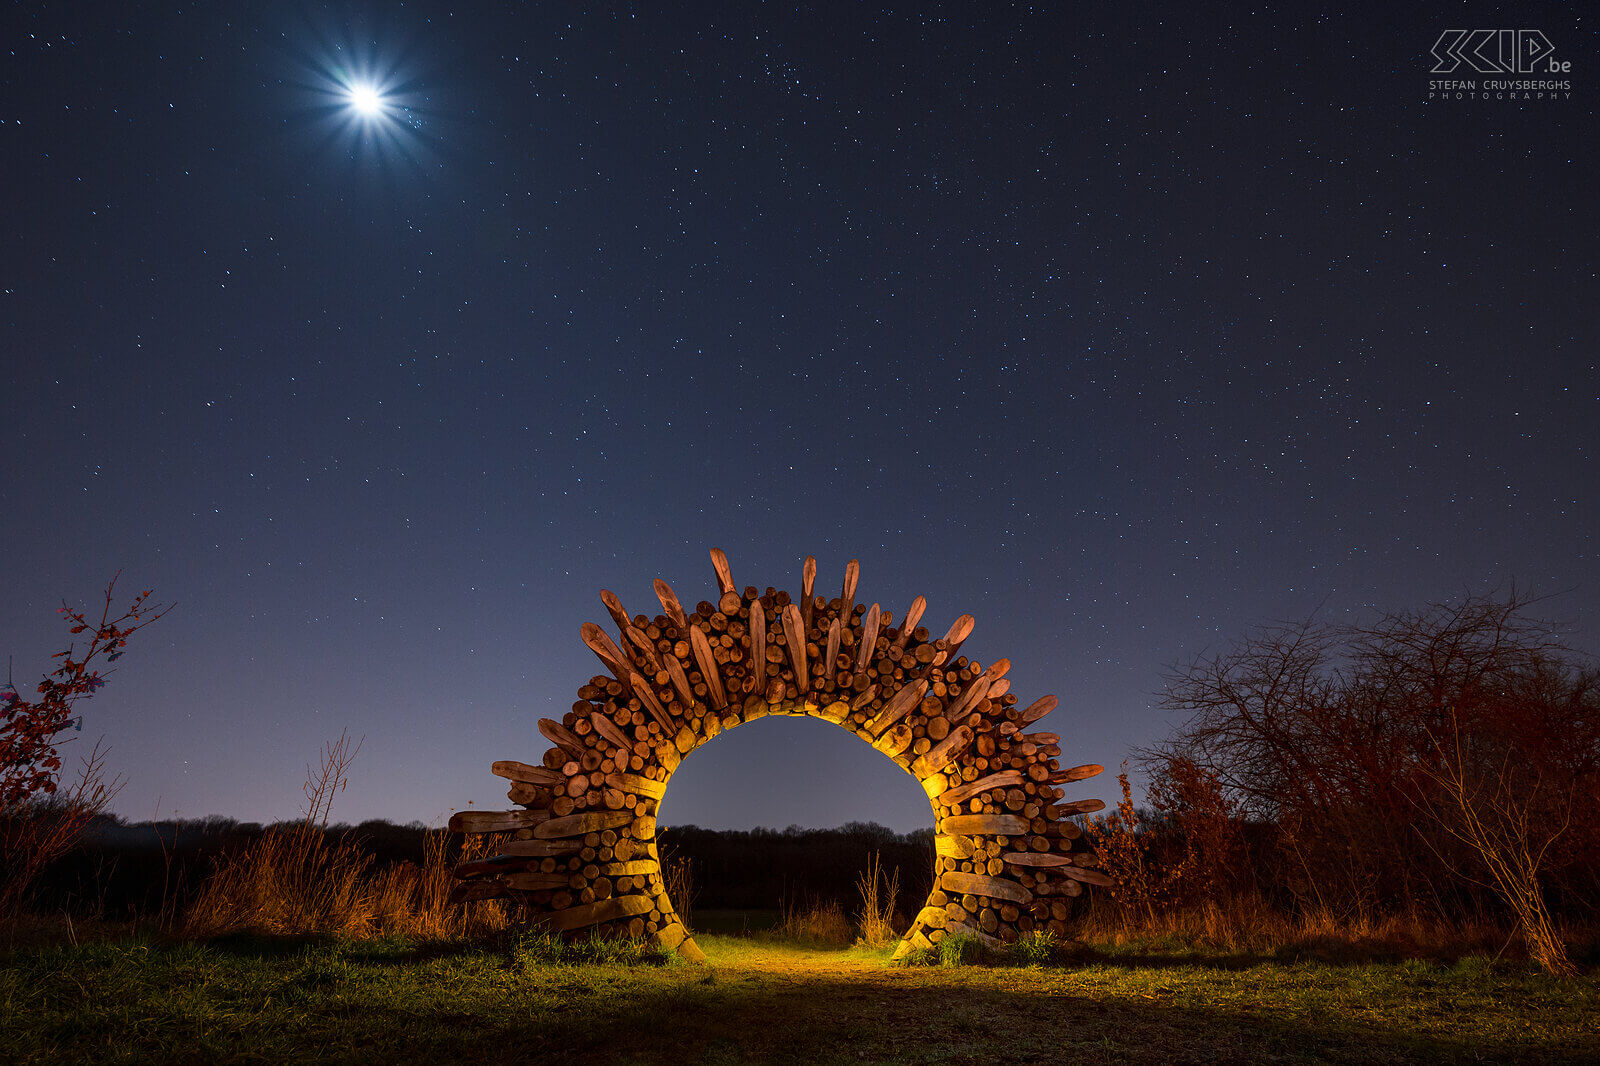 Hageland by night - Full moon at the Chartreuzenforrest gate in Holsbeek Full moon and a beautiful starry sky at the gate on the edge of the Chartreuzenforrest, located in Holsbeek and Lubbeek. The wooden gate is a beautiful work of art in the shape of a sun. I tried to create some atmosphere by doing some lightpainting. Stefan Cruysberghs